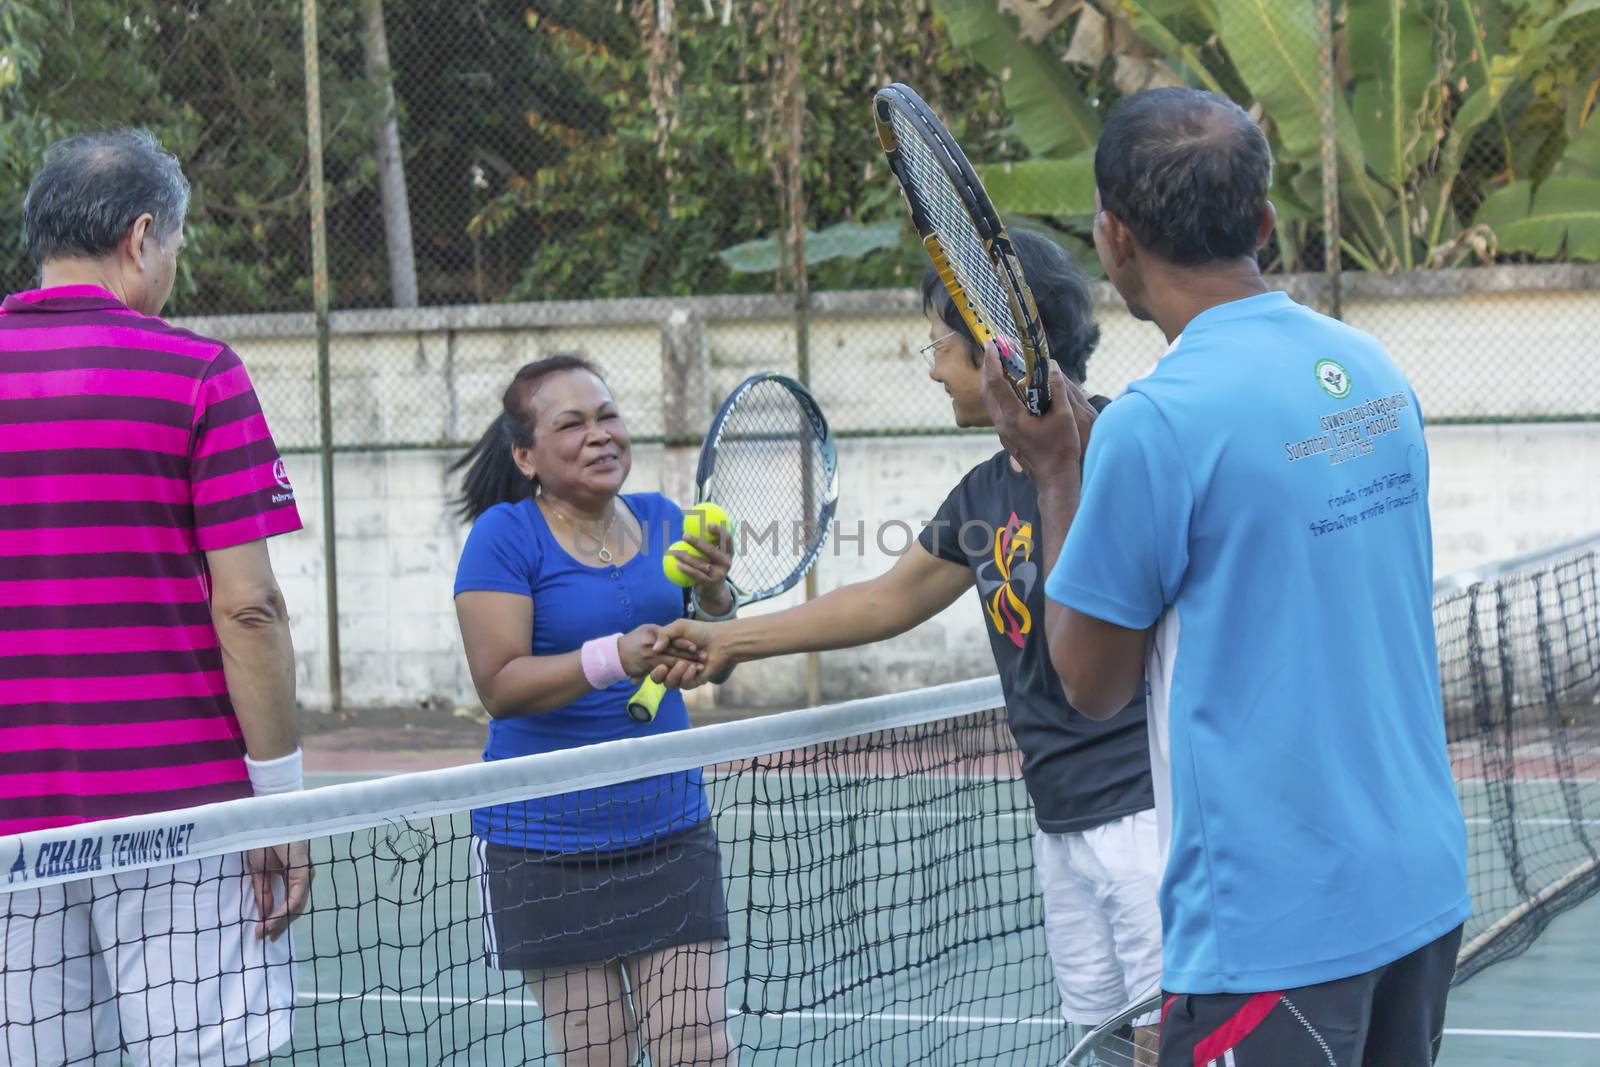 SURAT THANI, THAILAND - MARCH 1:Unidentified Thai senior tennis players shakes the hands after winning the match on March 1, 2014 in Chaiya tennis court, Surat Thani, Thailand.